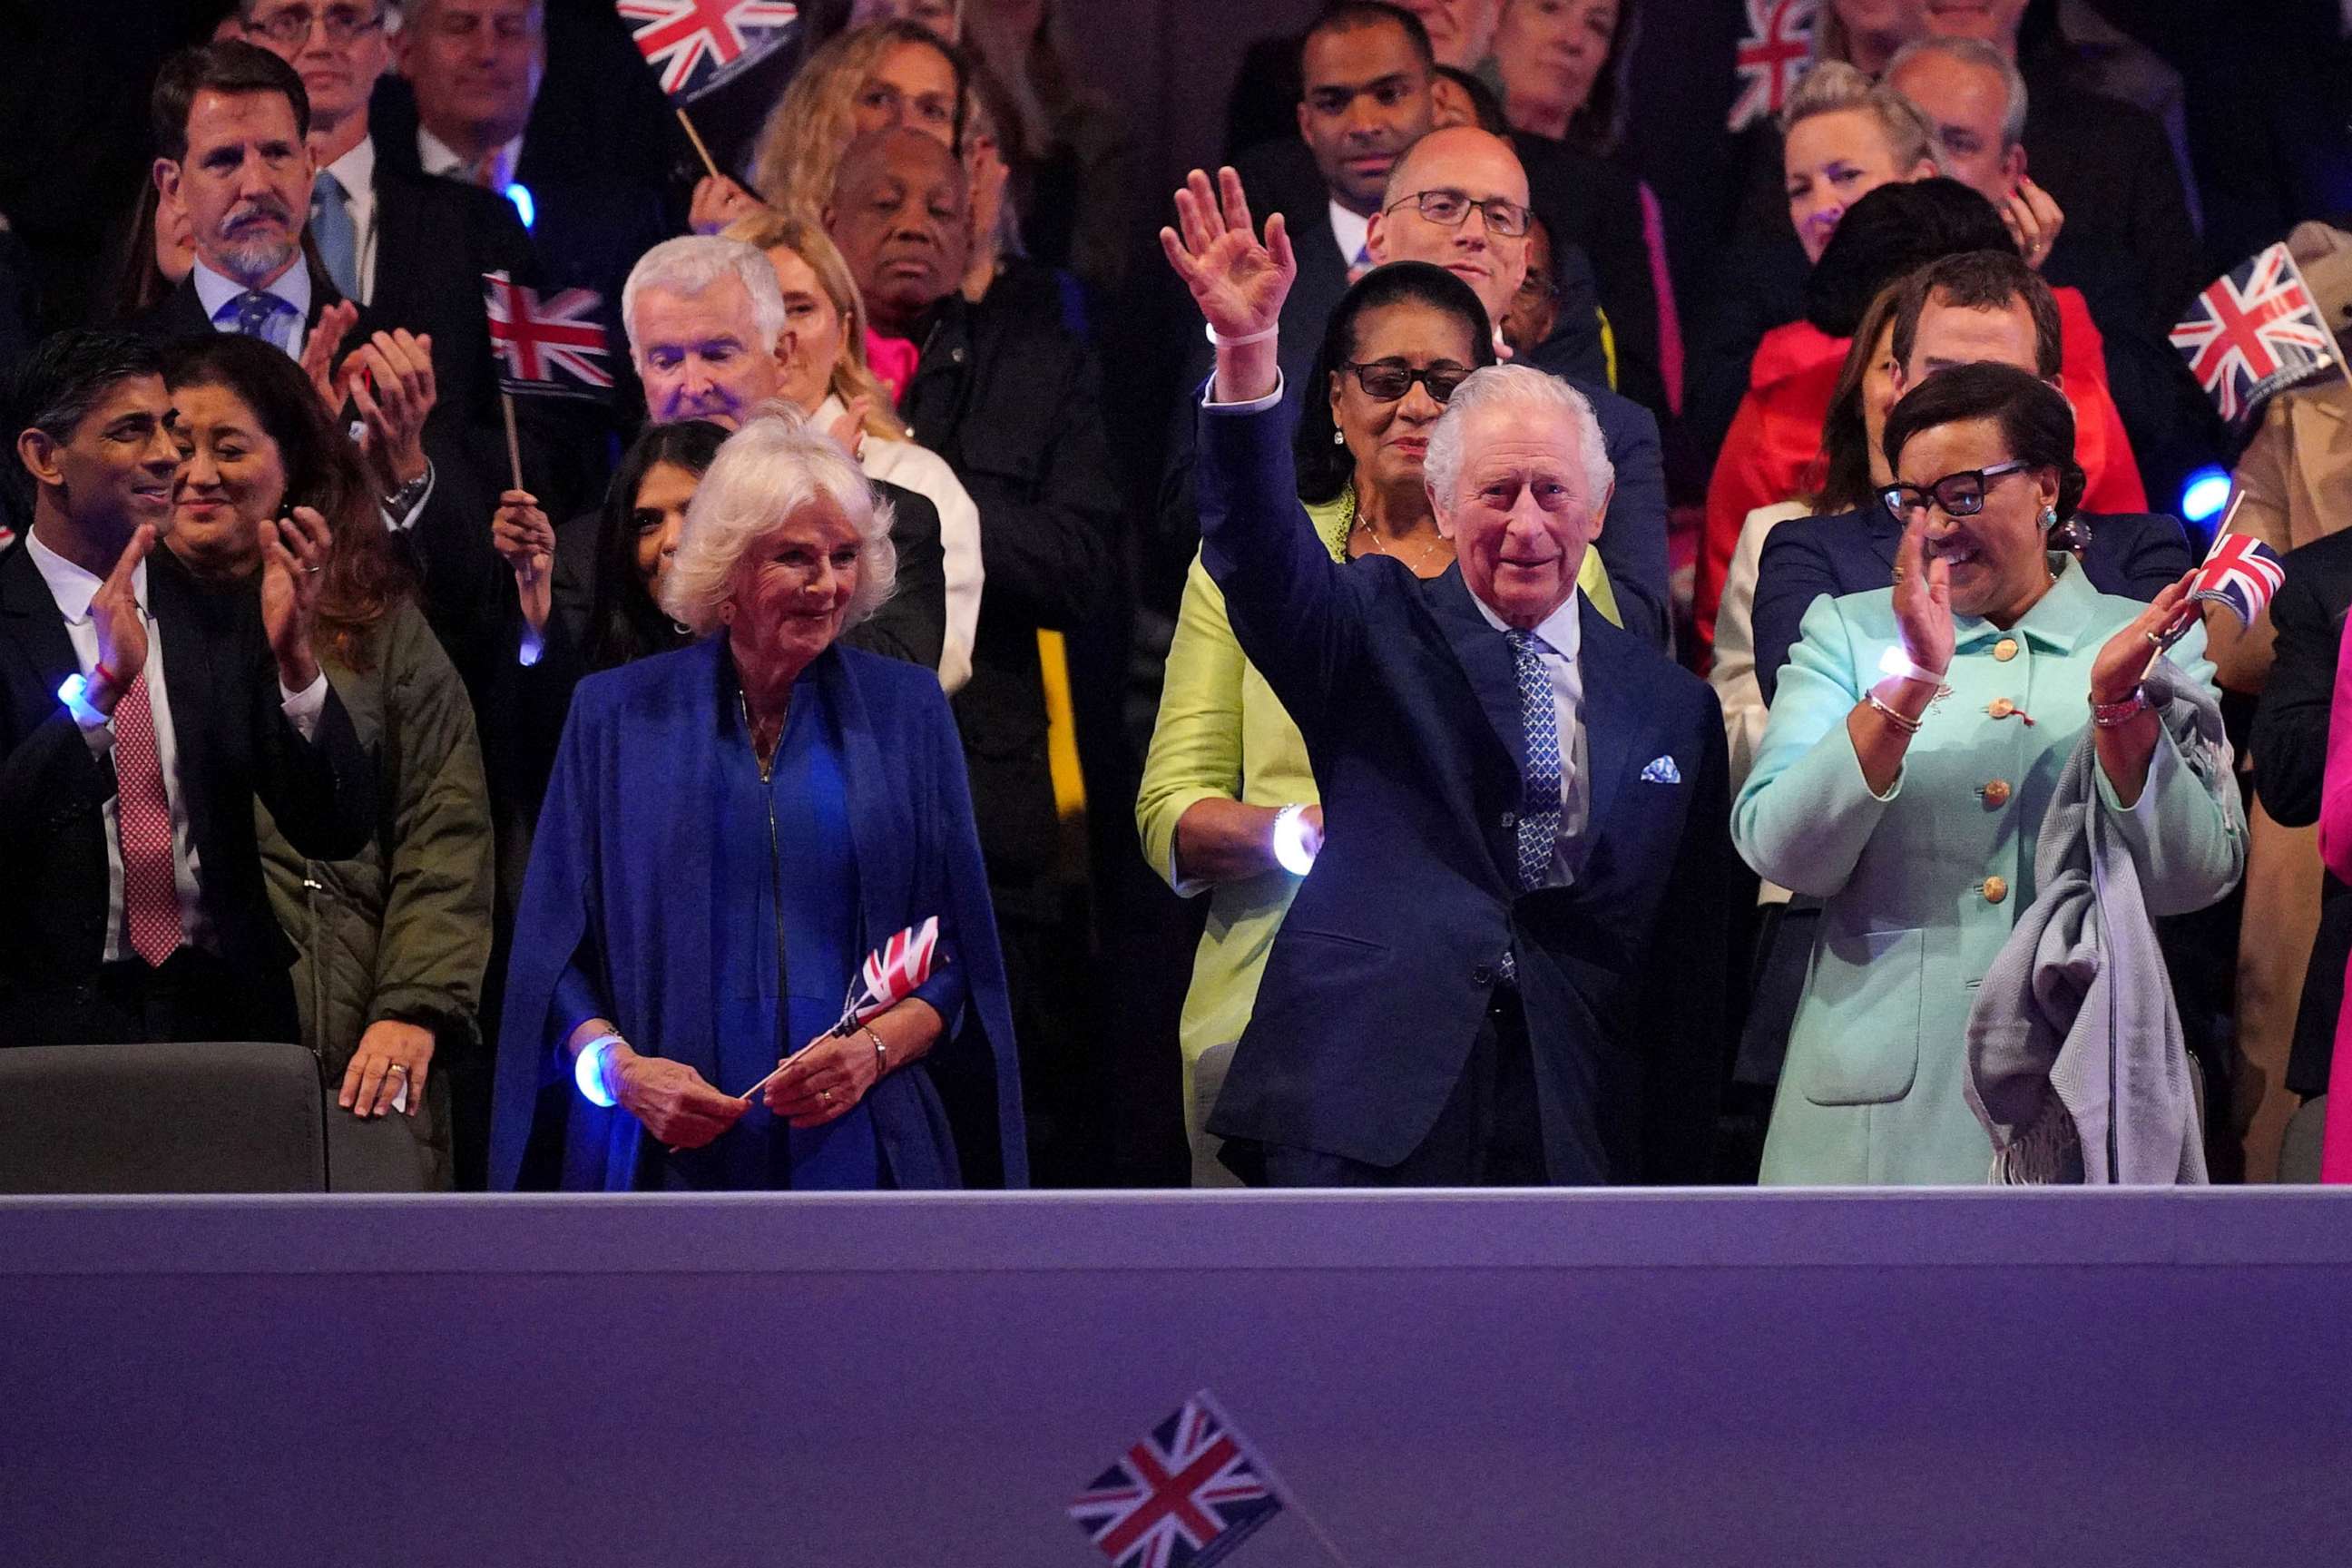 PHOTO: Prime Minister Rishi Sunak, Akshata Murty, Queen Camilla, King Charles III and Commonwealth Secretary-General, Patricia Scotland, Baroness Scotland of Asthal in the Royal Box viewing the Coronation Concert held in the grounds of Windsor Castle.